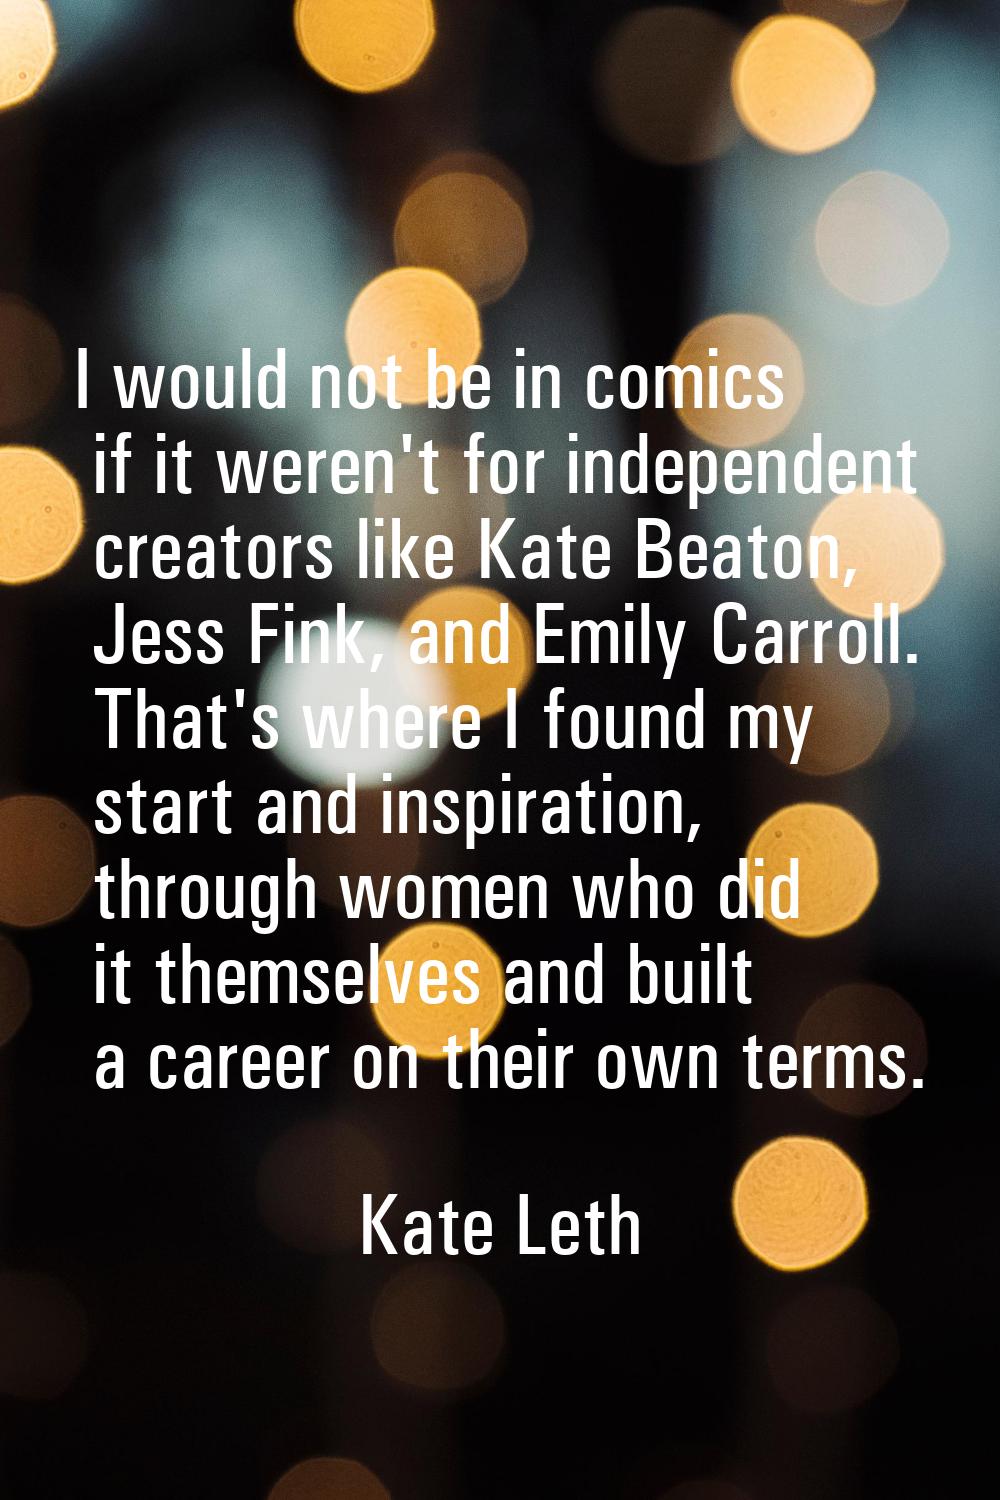 I would not be in comics if it weren't for independent creators like Kate Beaton, Jess Fink, and Em